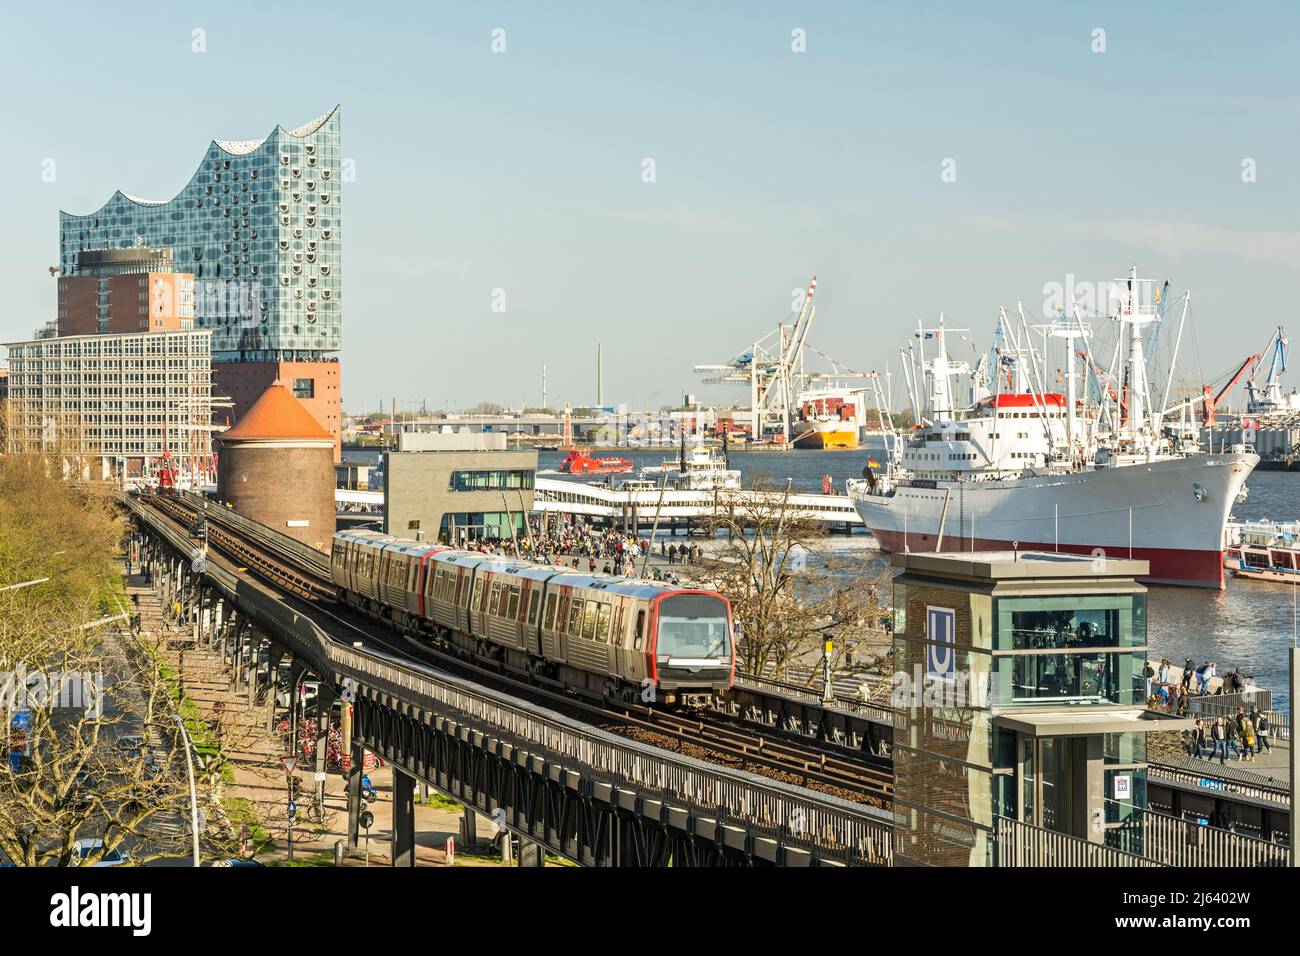 View of the Elbe River, waterfront and train tracks at the famous St. Pauli Landungsbrücken in Hamburg, Germany Stock Photo